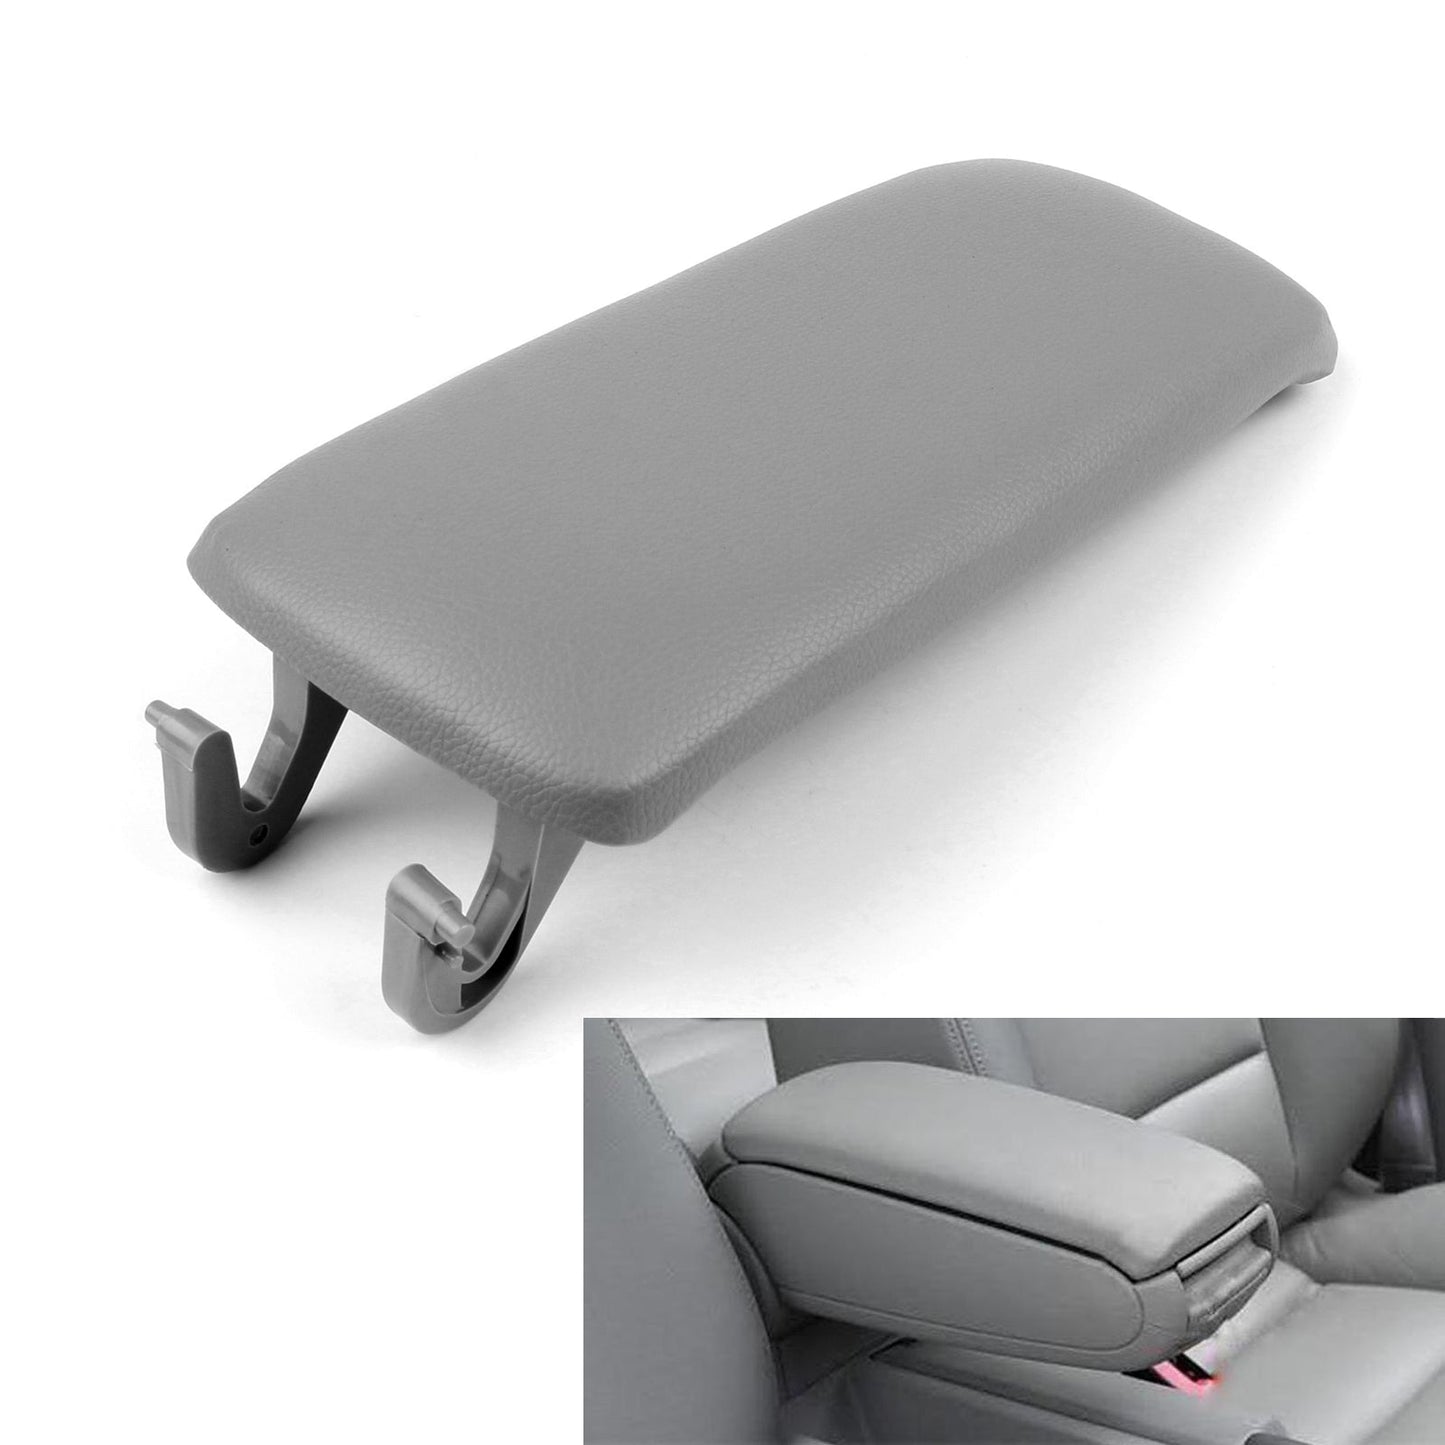 PU Leather Center Console Armrest Cover Lid For Audi A4 S4 A6 2000-2008 Gray